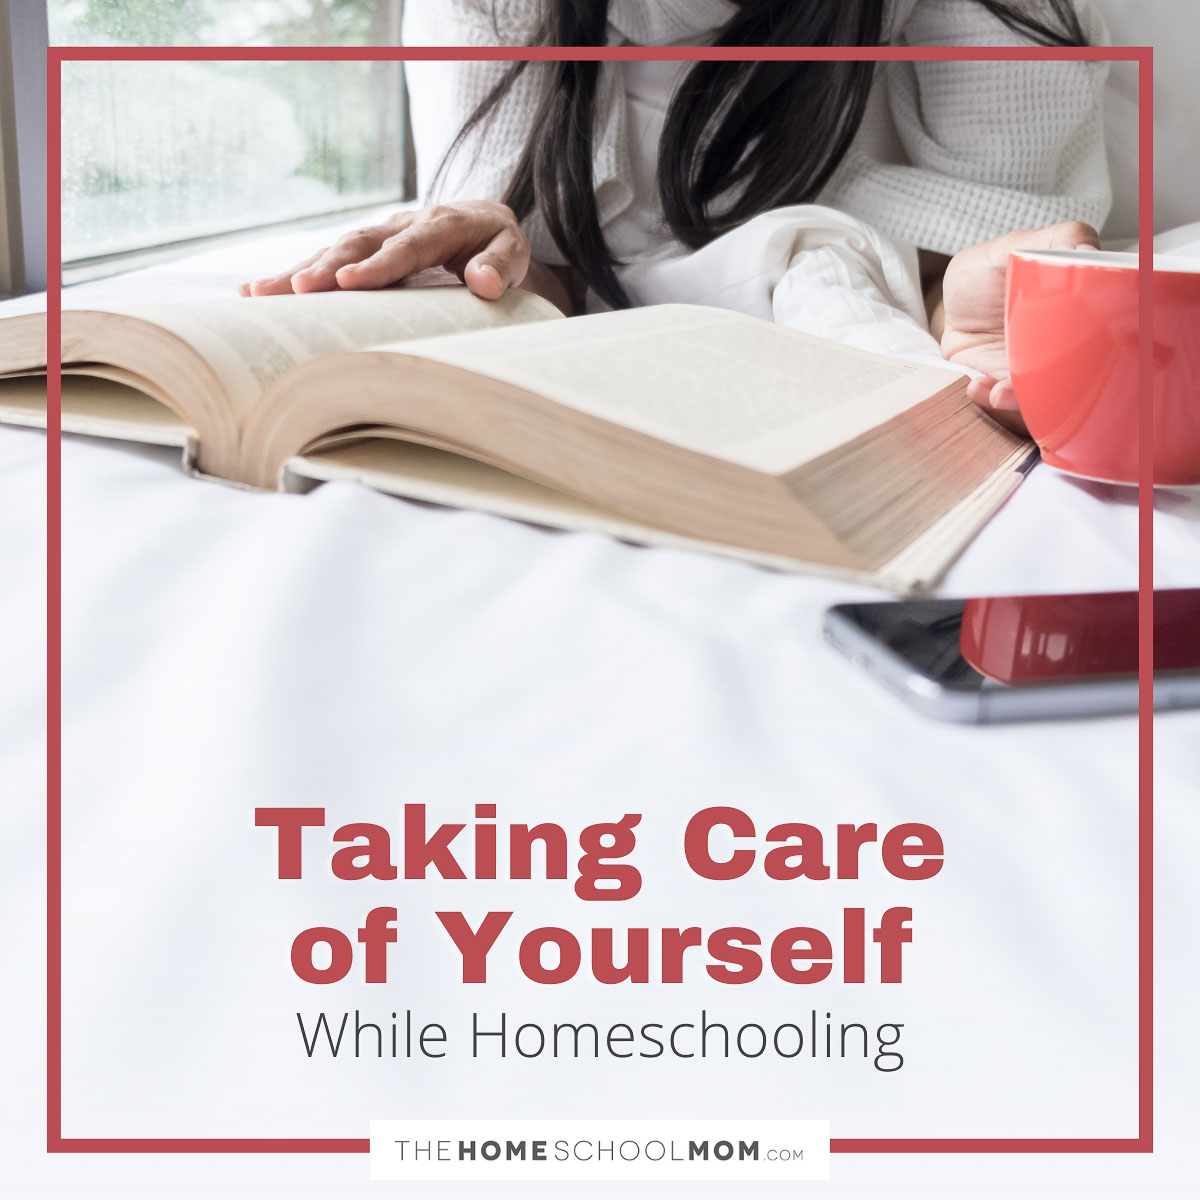 Taking Care of Yourself While Homeschooling.